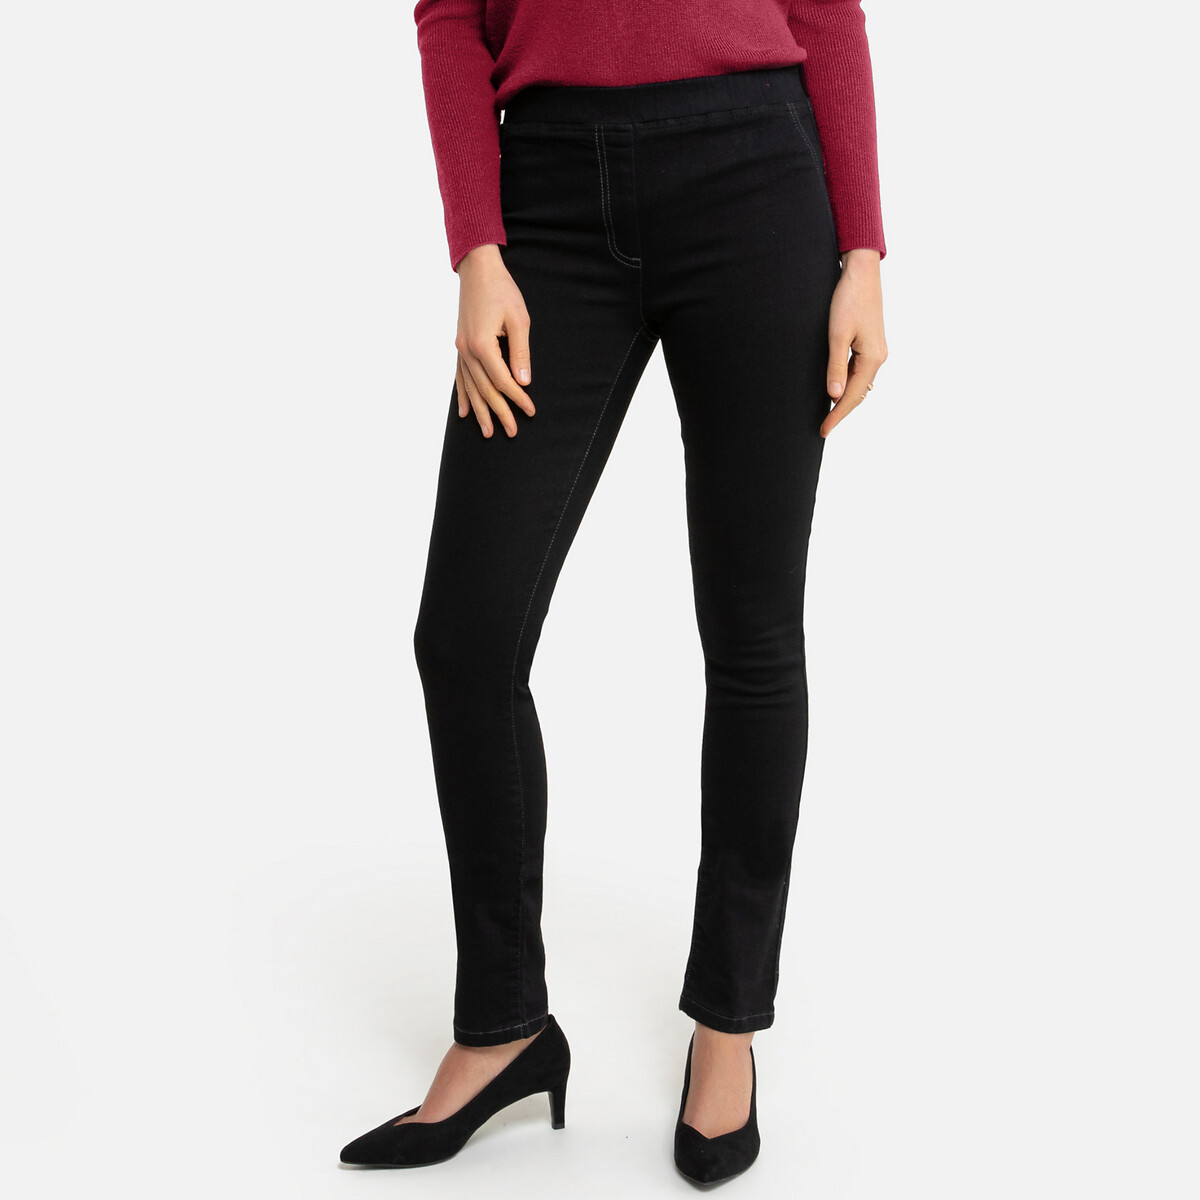 Image of Cotton Mix Jeggings with Elasticated Waist, Length 30.5"